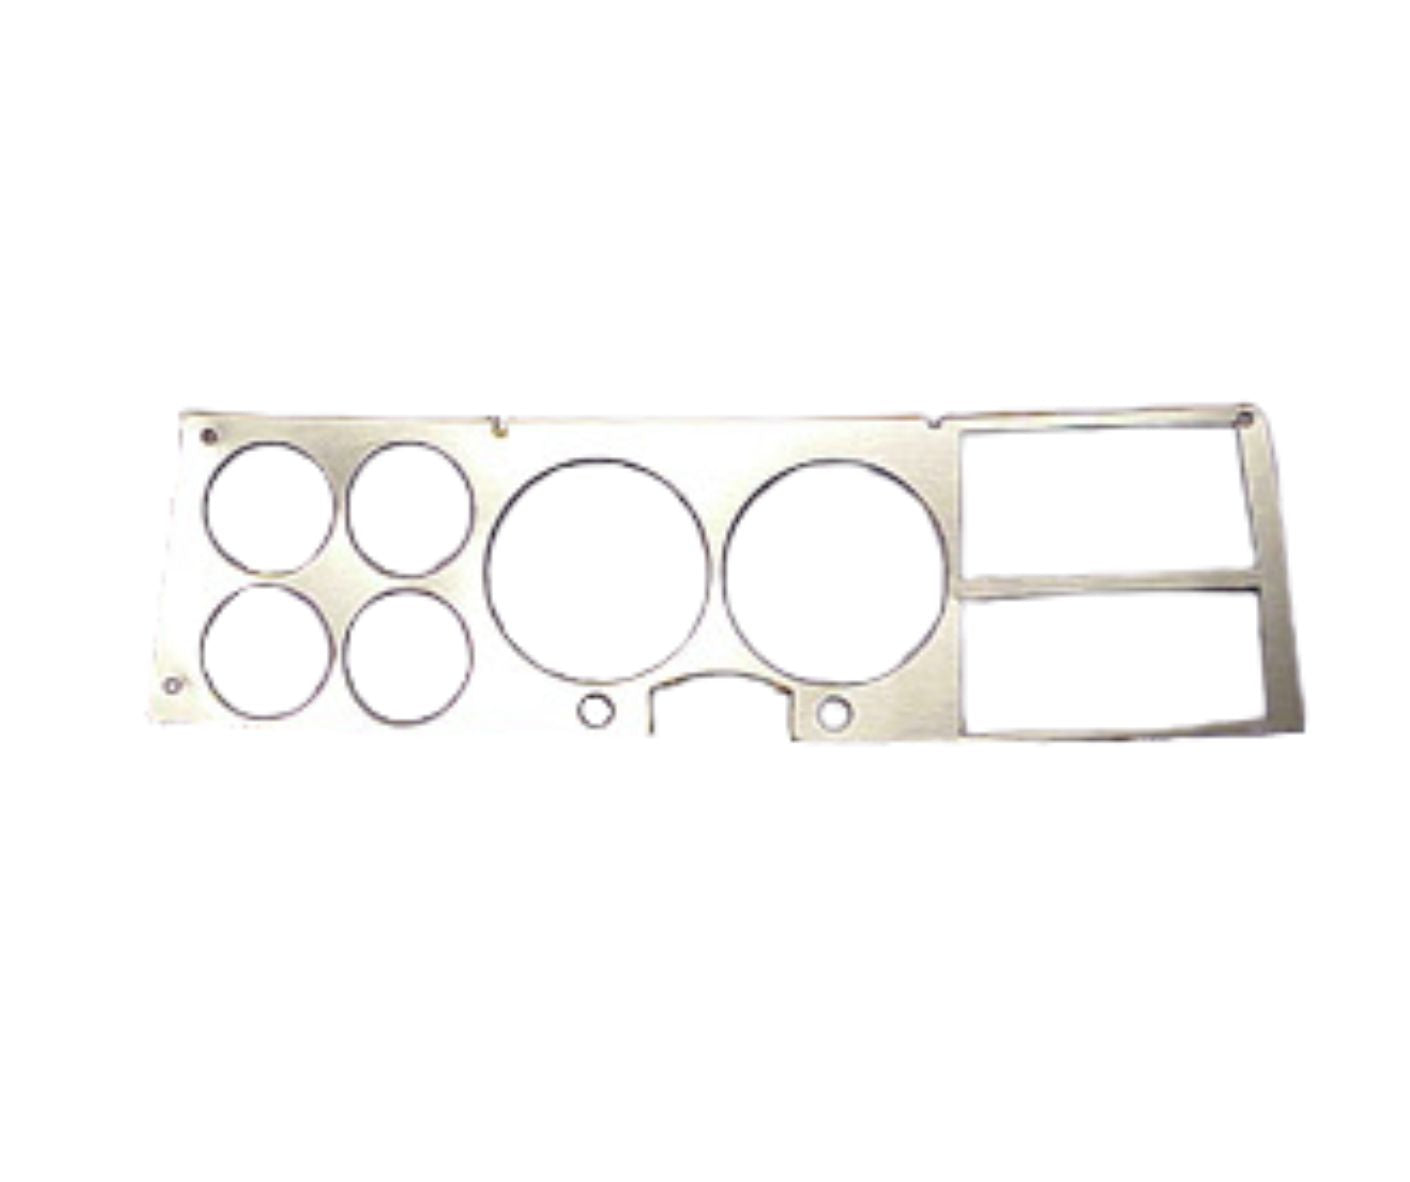 1978-1980 Chevy C10 Instrument Bezel with A/C Brushed Aluminum Style - GM Truck